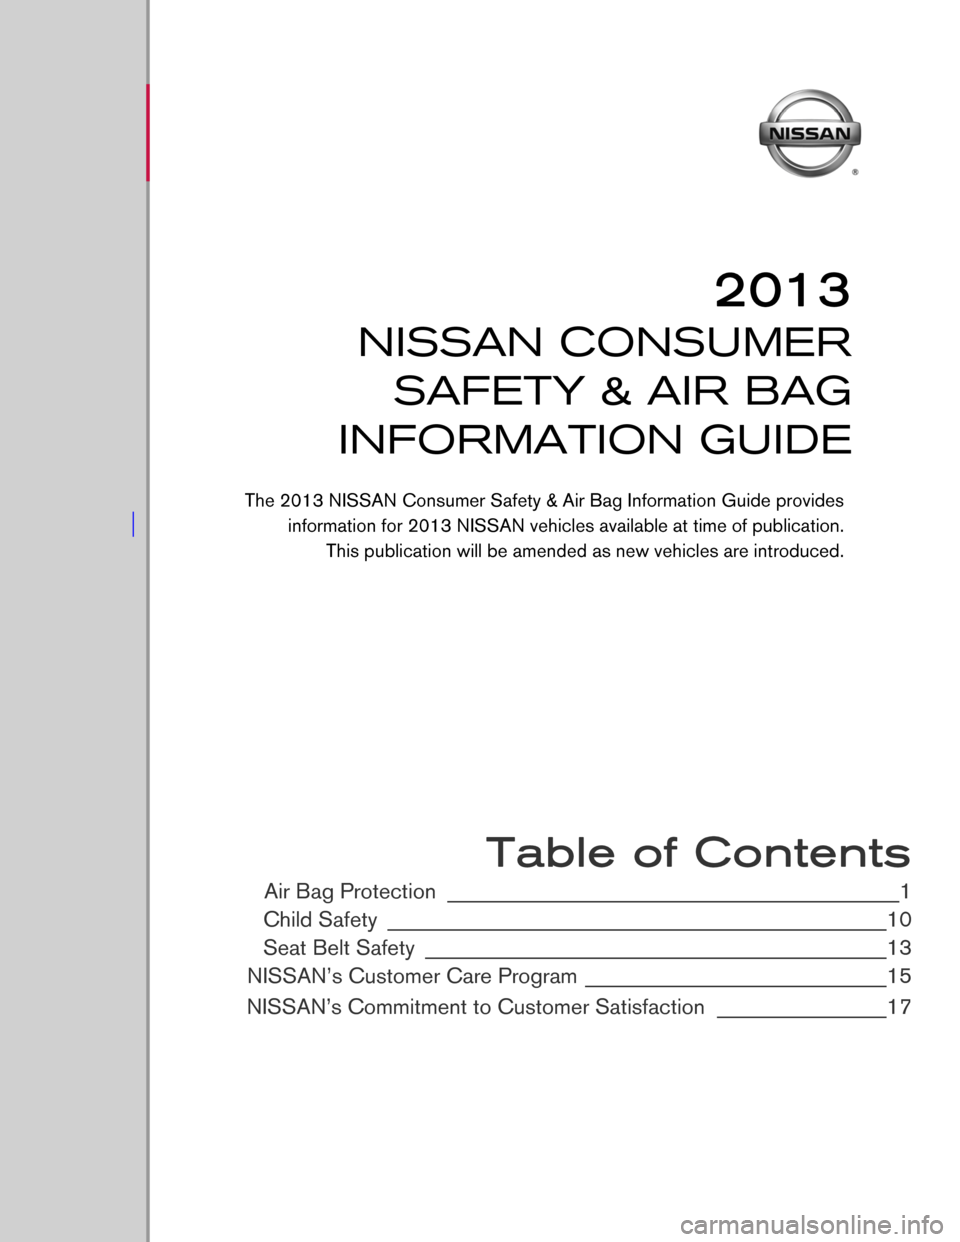 NISSAN 370Z ROADSTER 2013 Z34 Consumer Safety Air Bag Information Guide  
 
 
 
 
 
 
 
 
 
 
 
 
 
 
 
 
 
 
 
 
 
 
 Table of Contents
Air Bag Protection ________________________________________________1
Child Safety
 ____________________________________________________